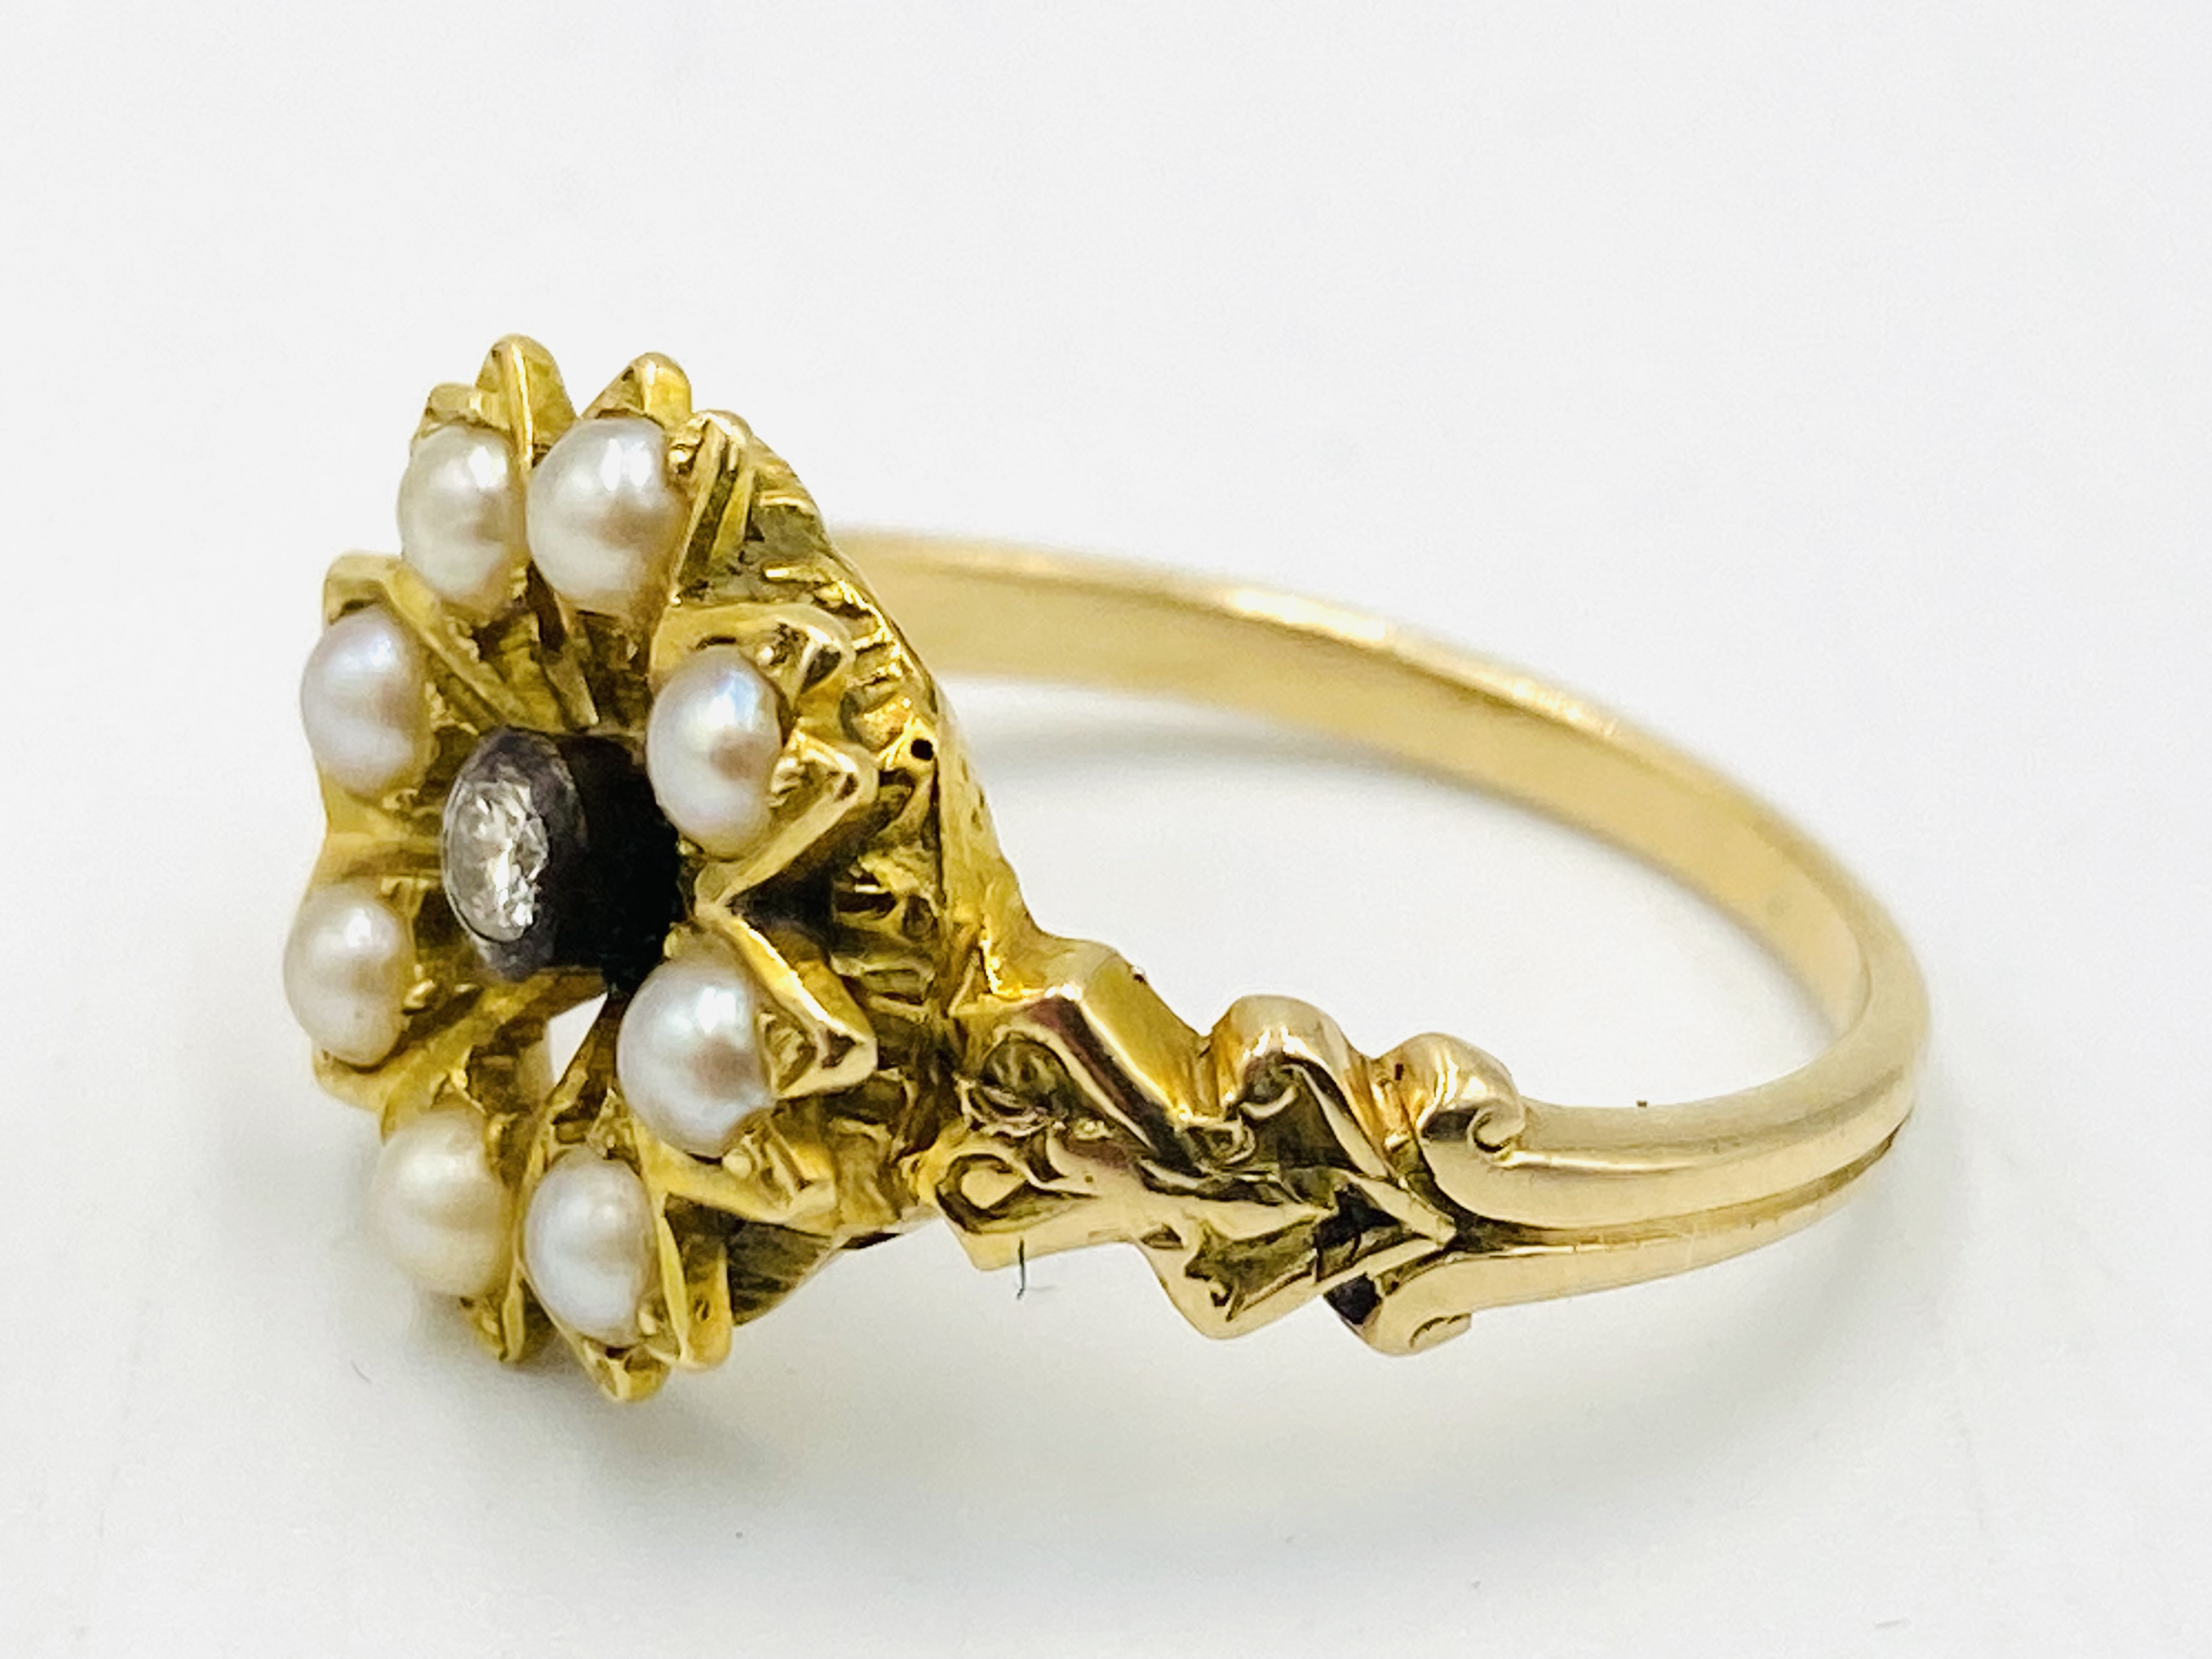 18ct gold ring set with central diamond and seed pearl surround - Image 2 of 4